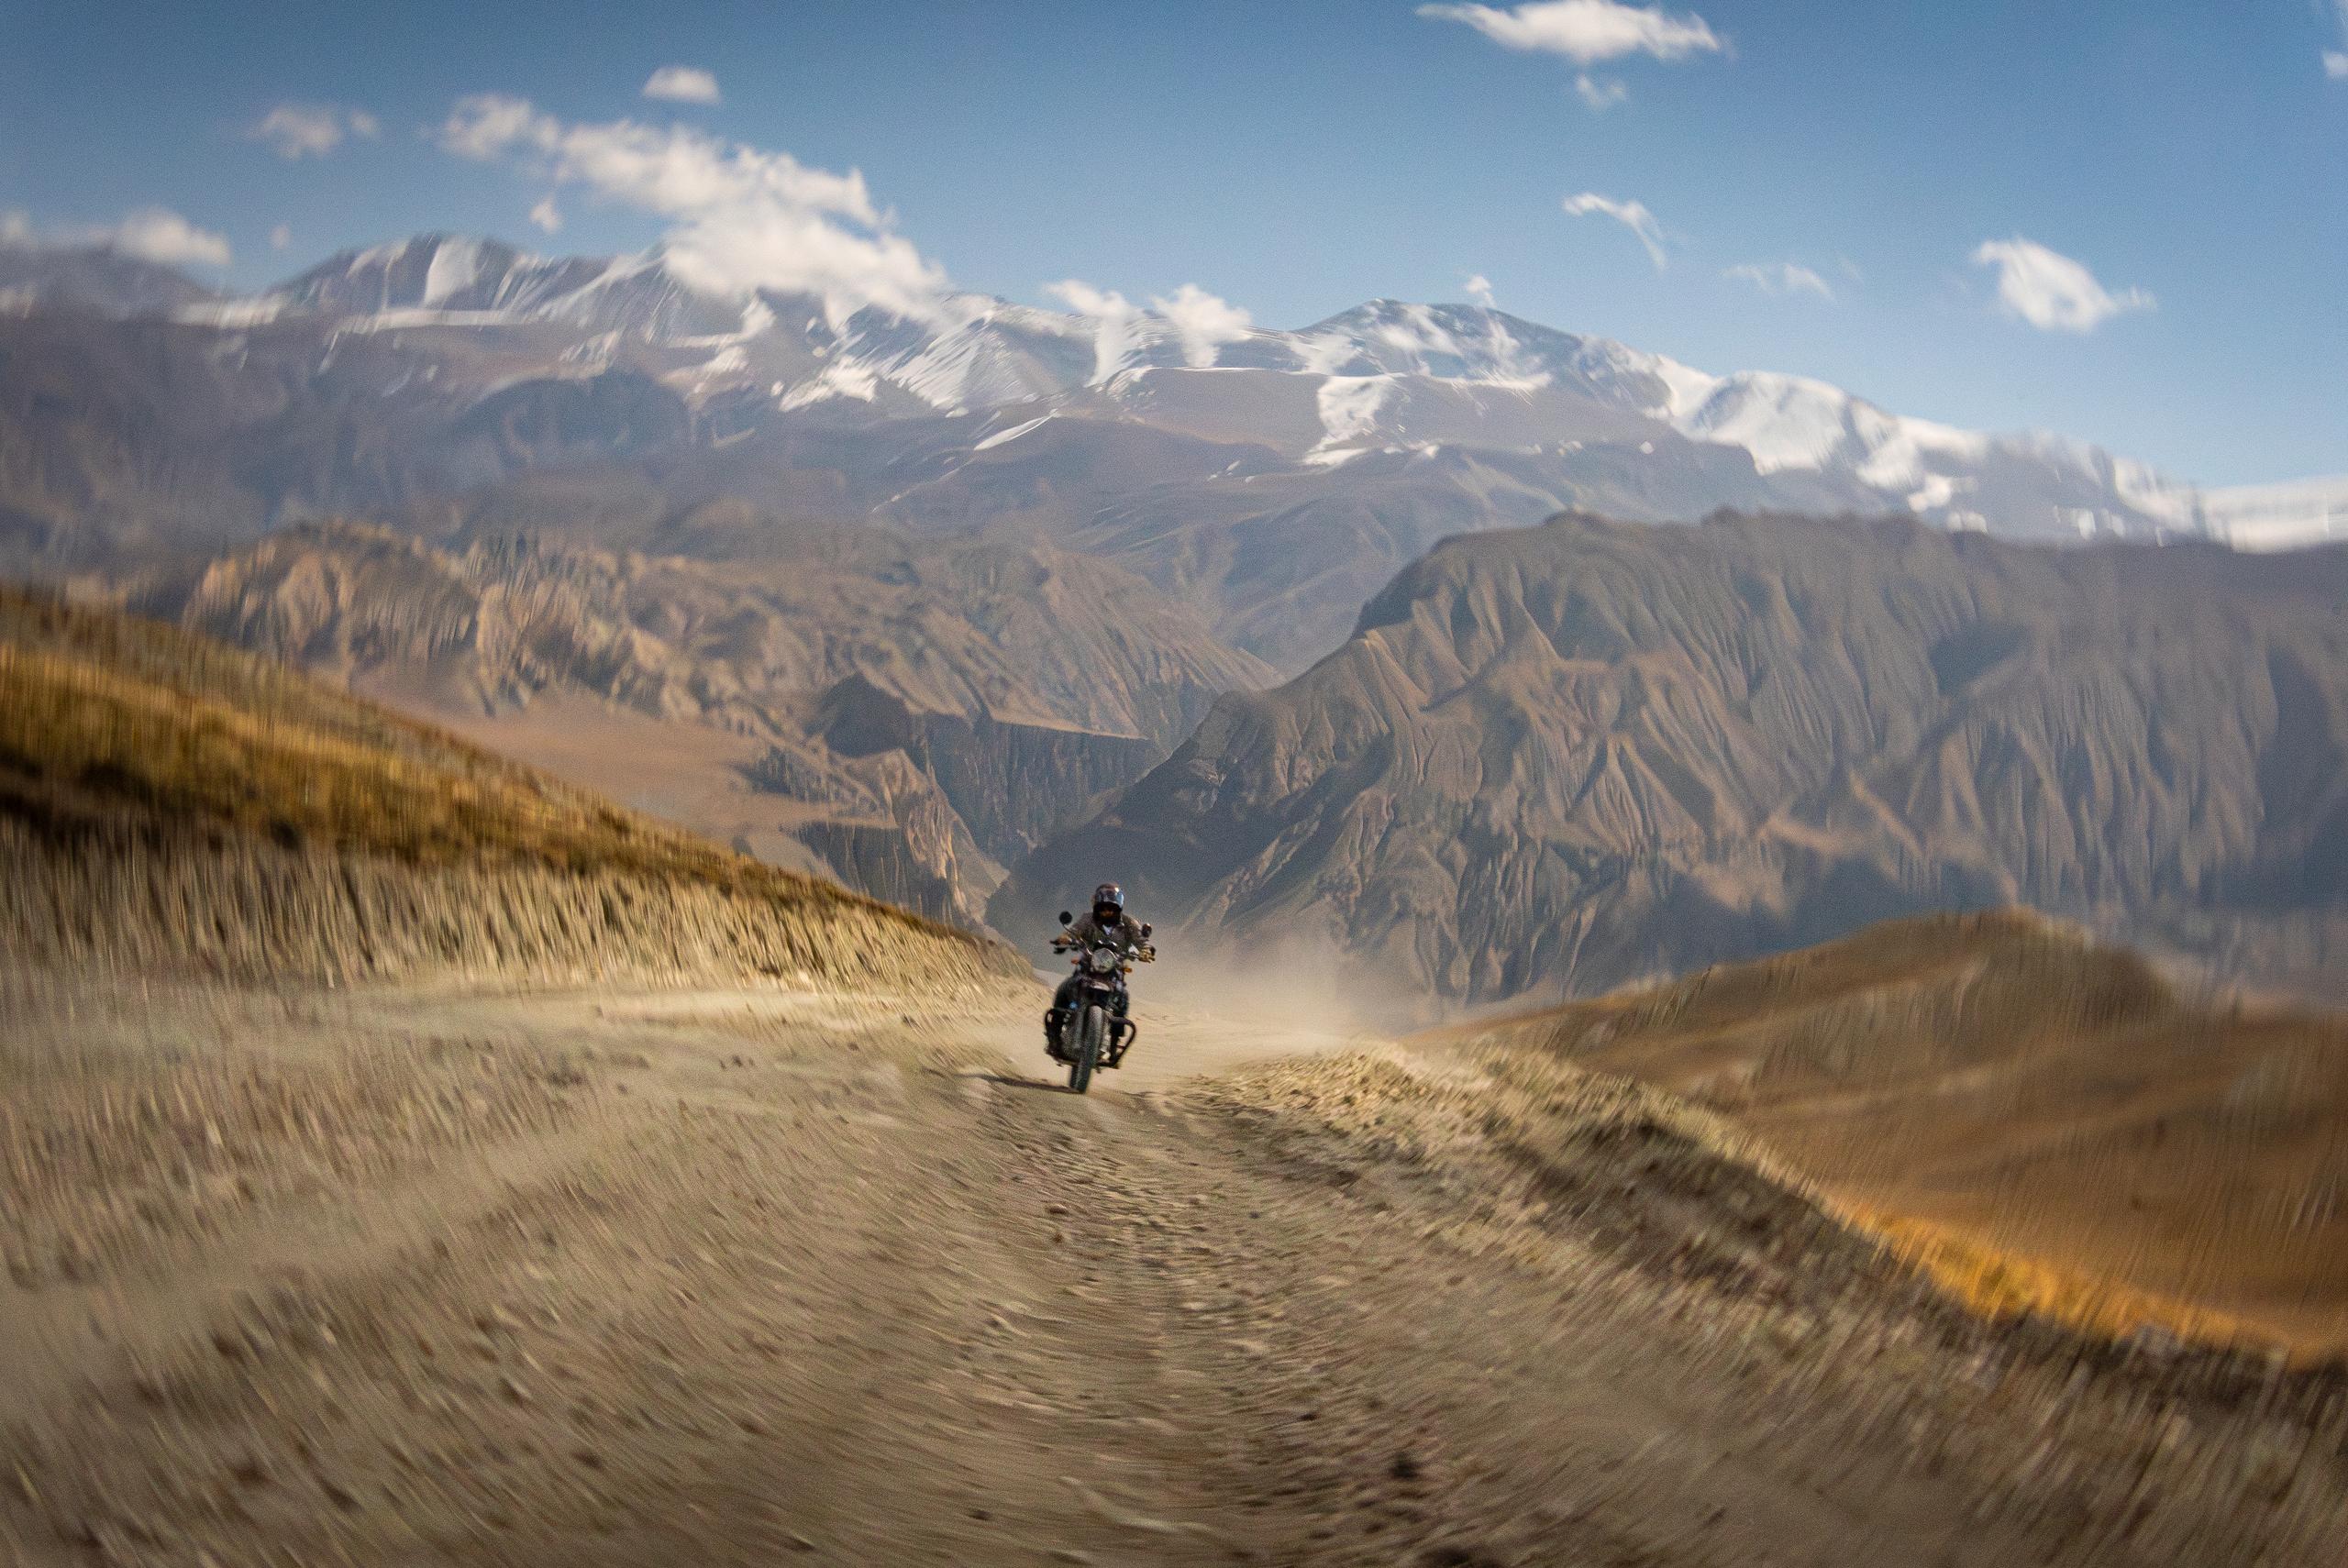 Motorcyclist riding and kicking up dust on dirt road with Himalayan mountains in the background